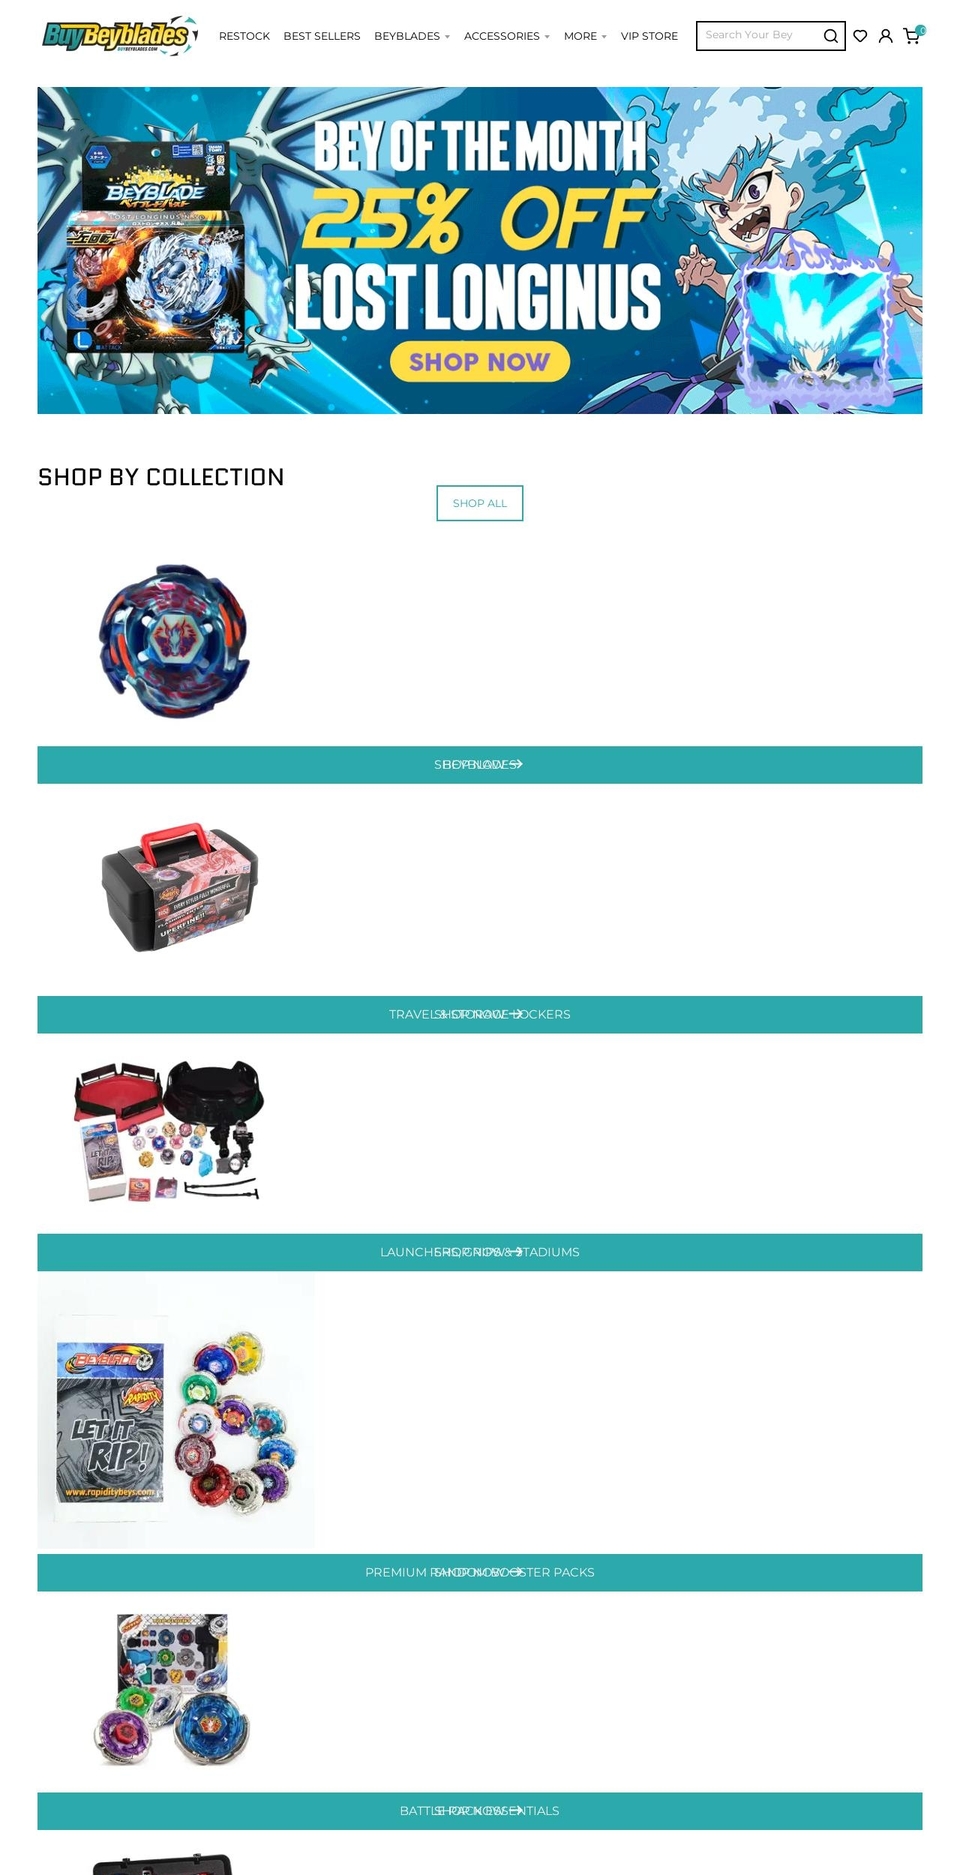 Smart Shopify theme site example buybeyblades.com